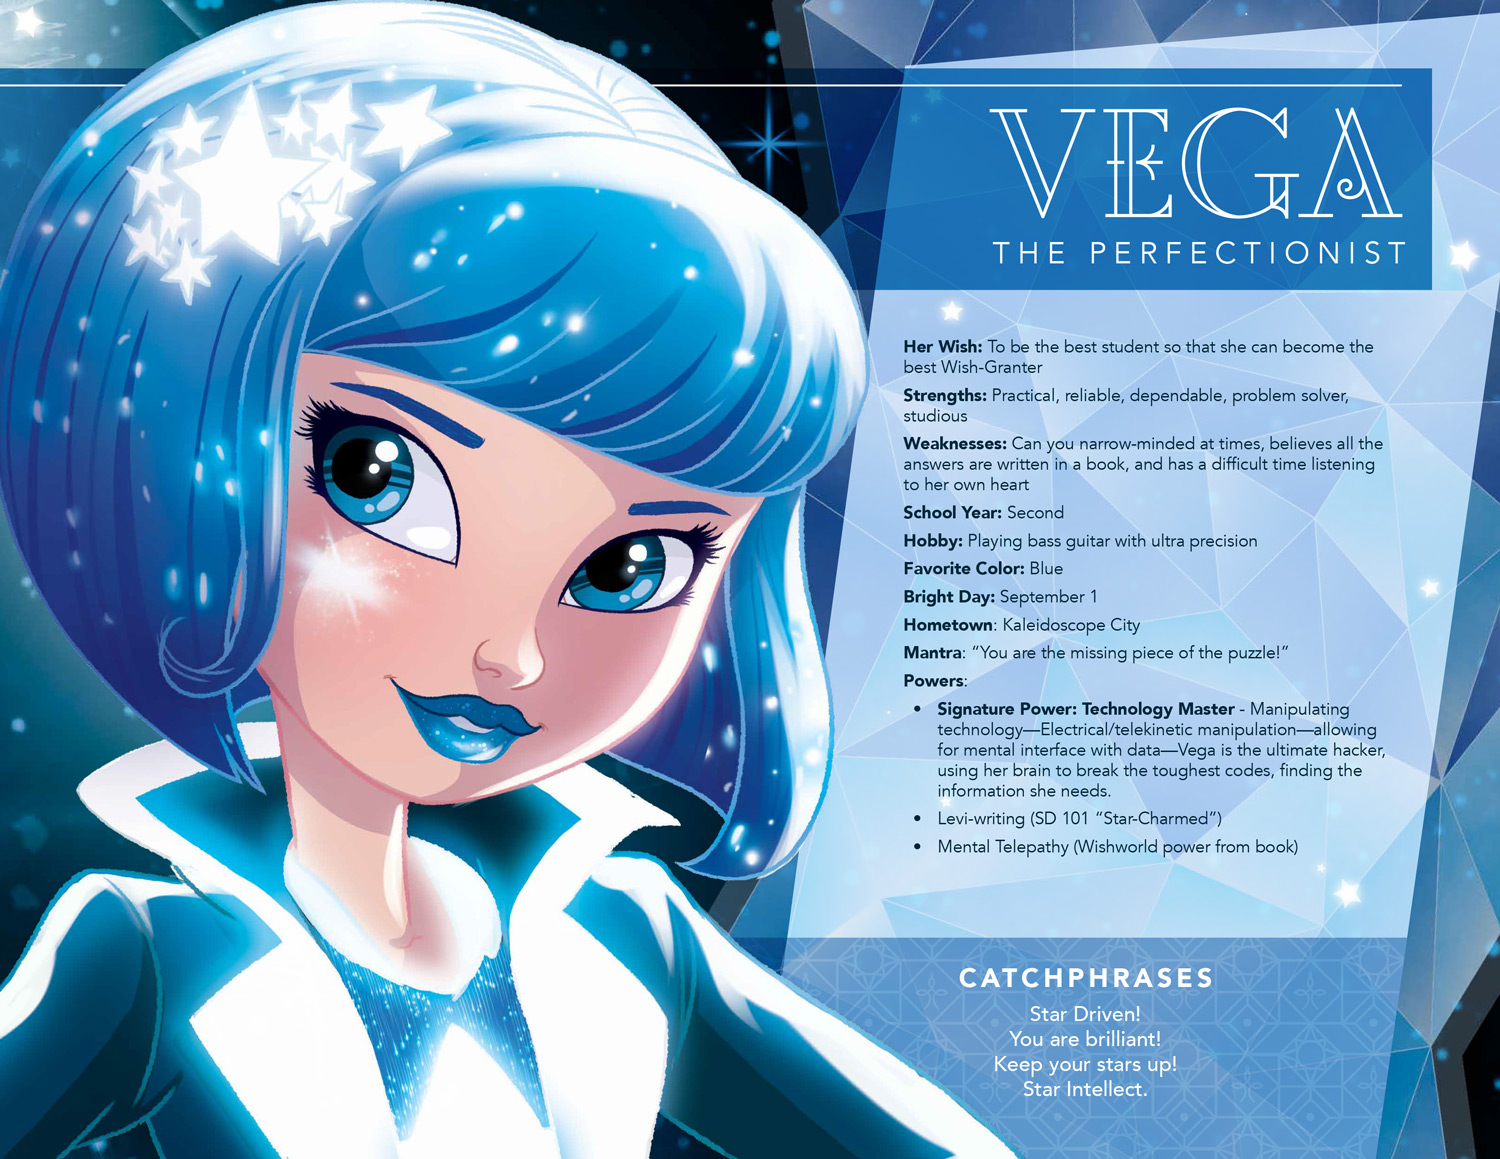 Vega Character Images and Information